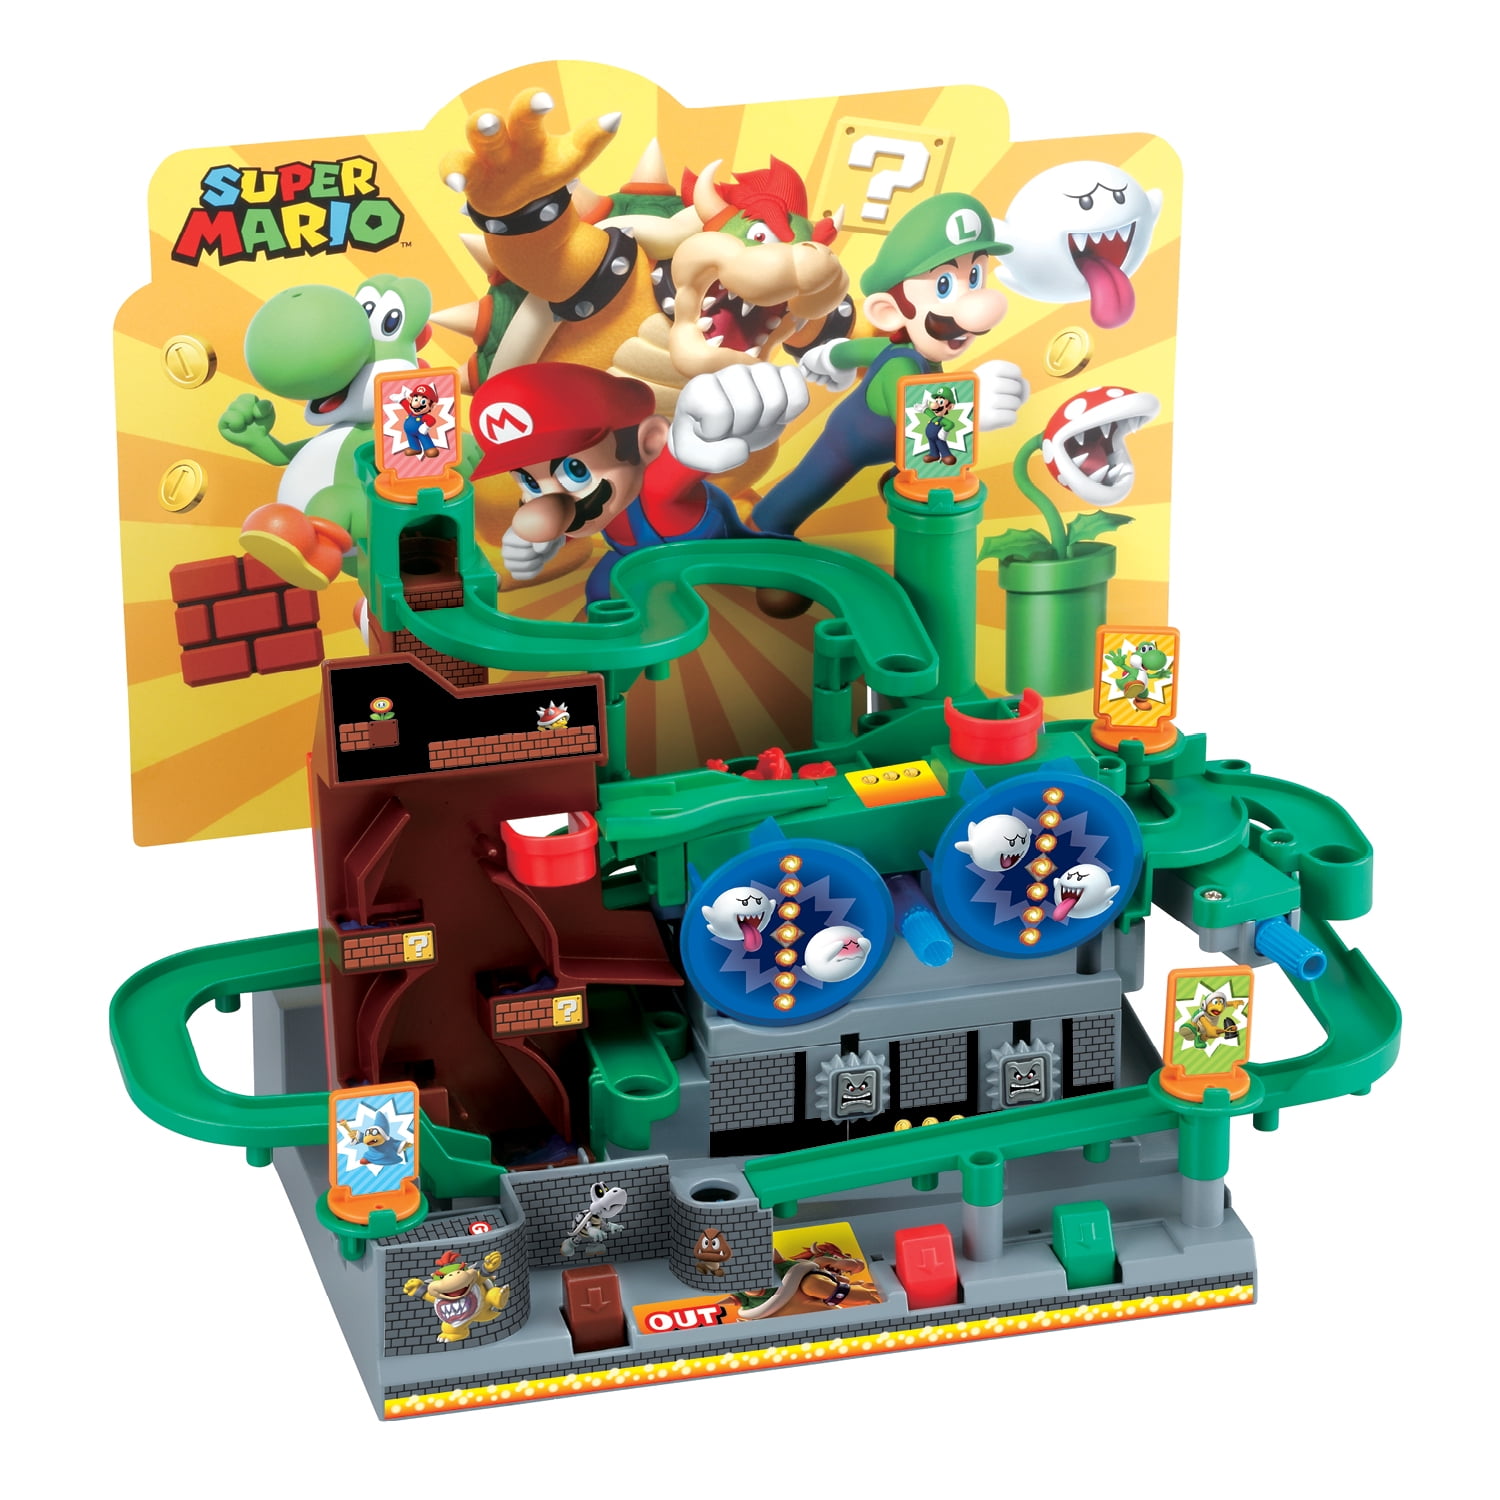 Super Mario Maze Game Deluxe from Epoch Single Player Tabletop Action Game for Ages 4+ 